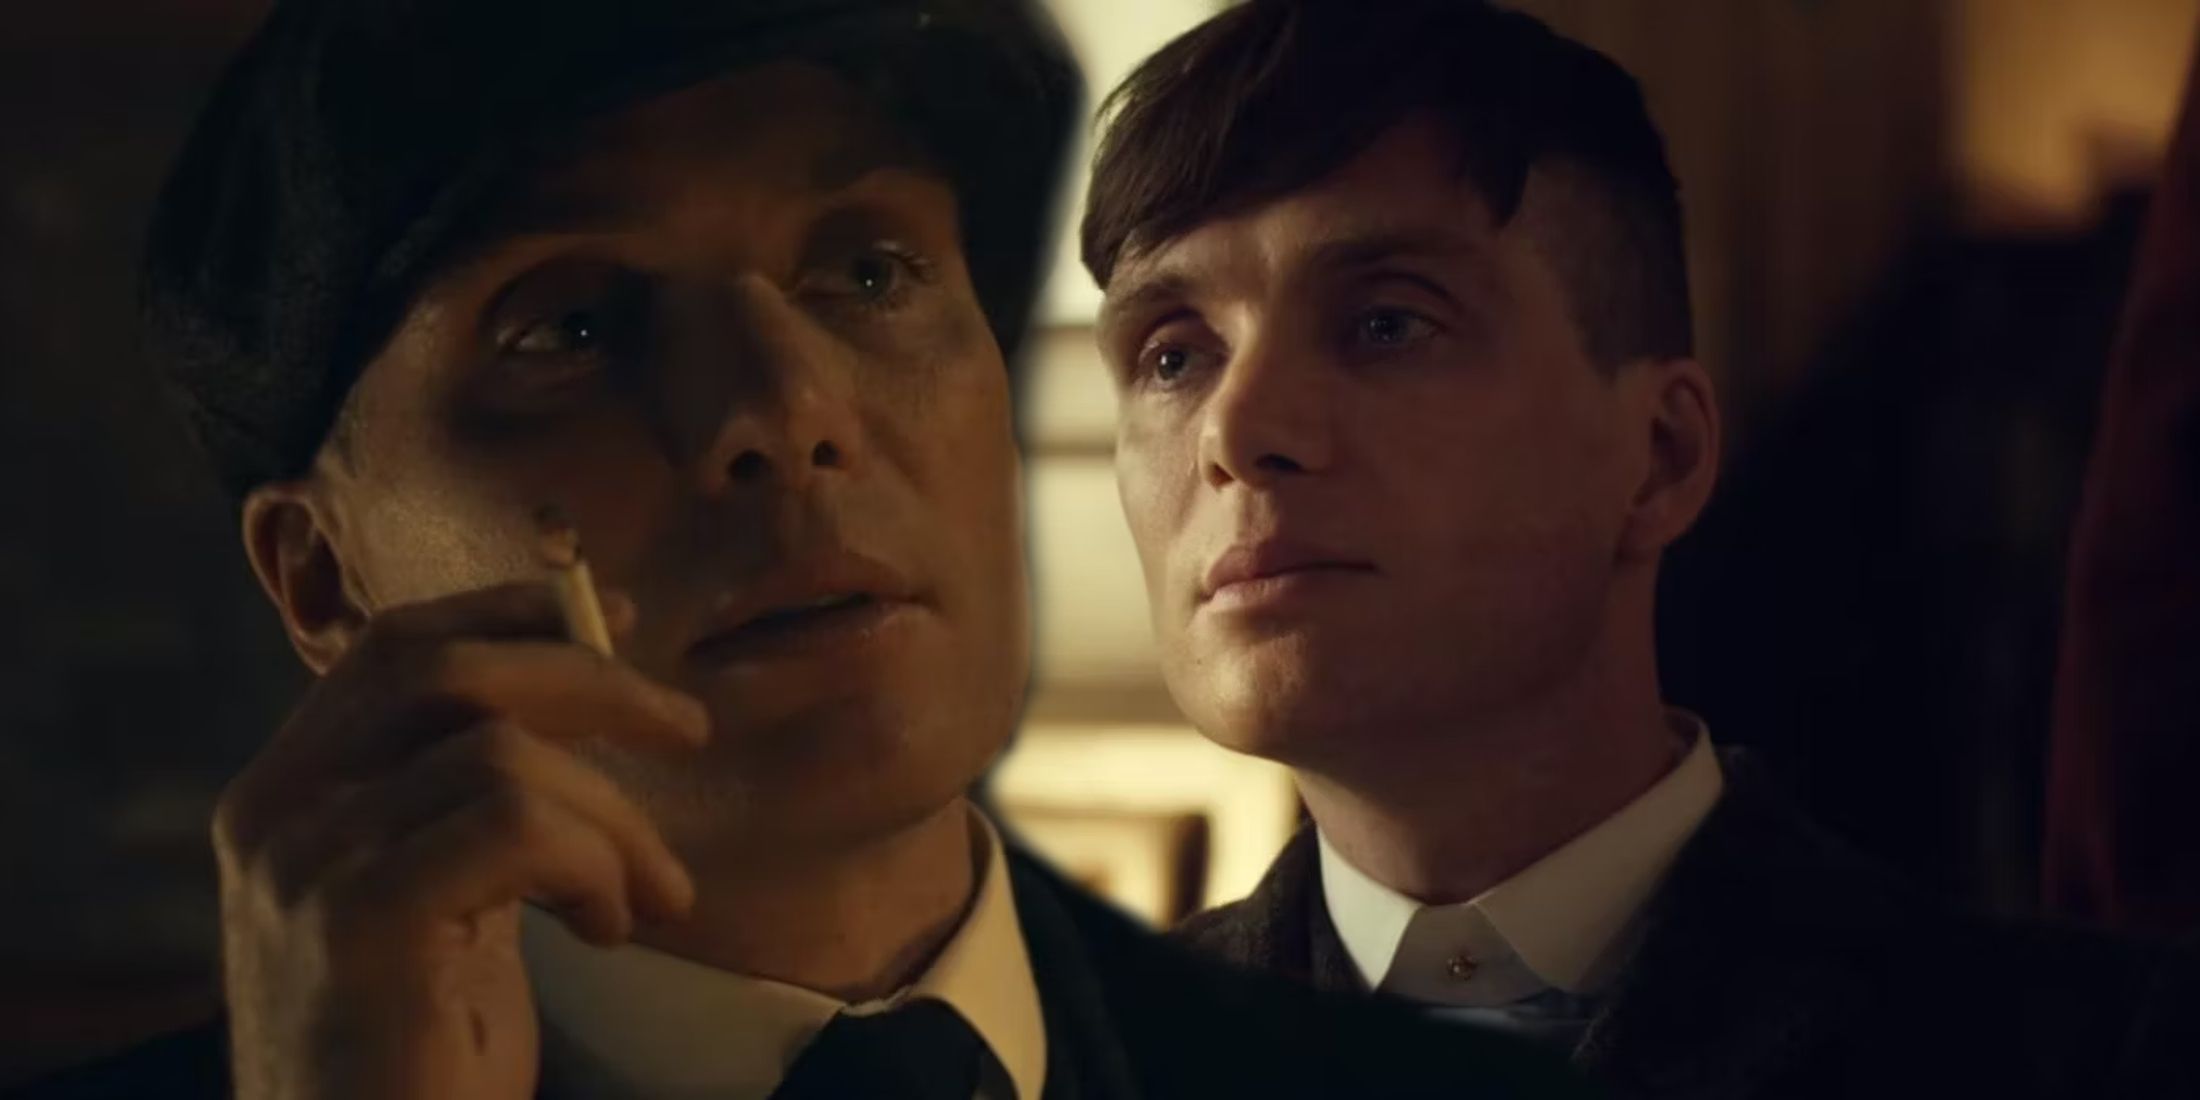 Cillian Murphy as Tommy Shelby smoking a cigarette next to Tommy looking serious in Peaky Blinders